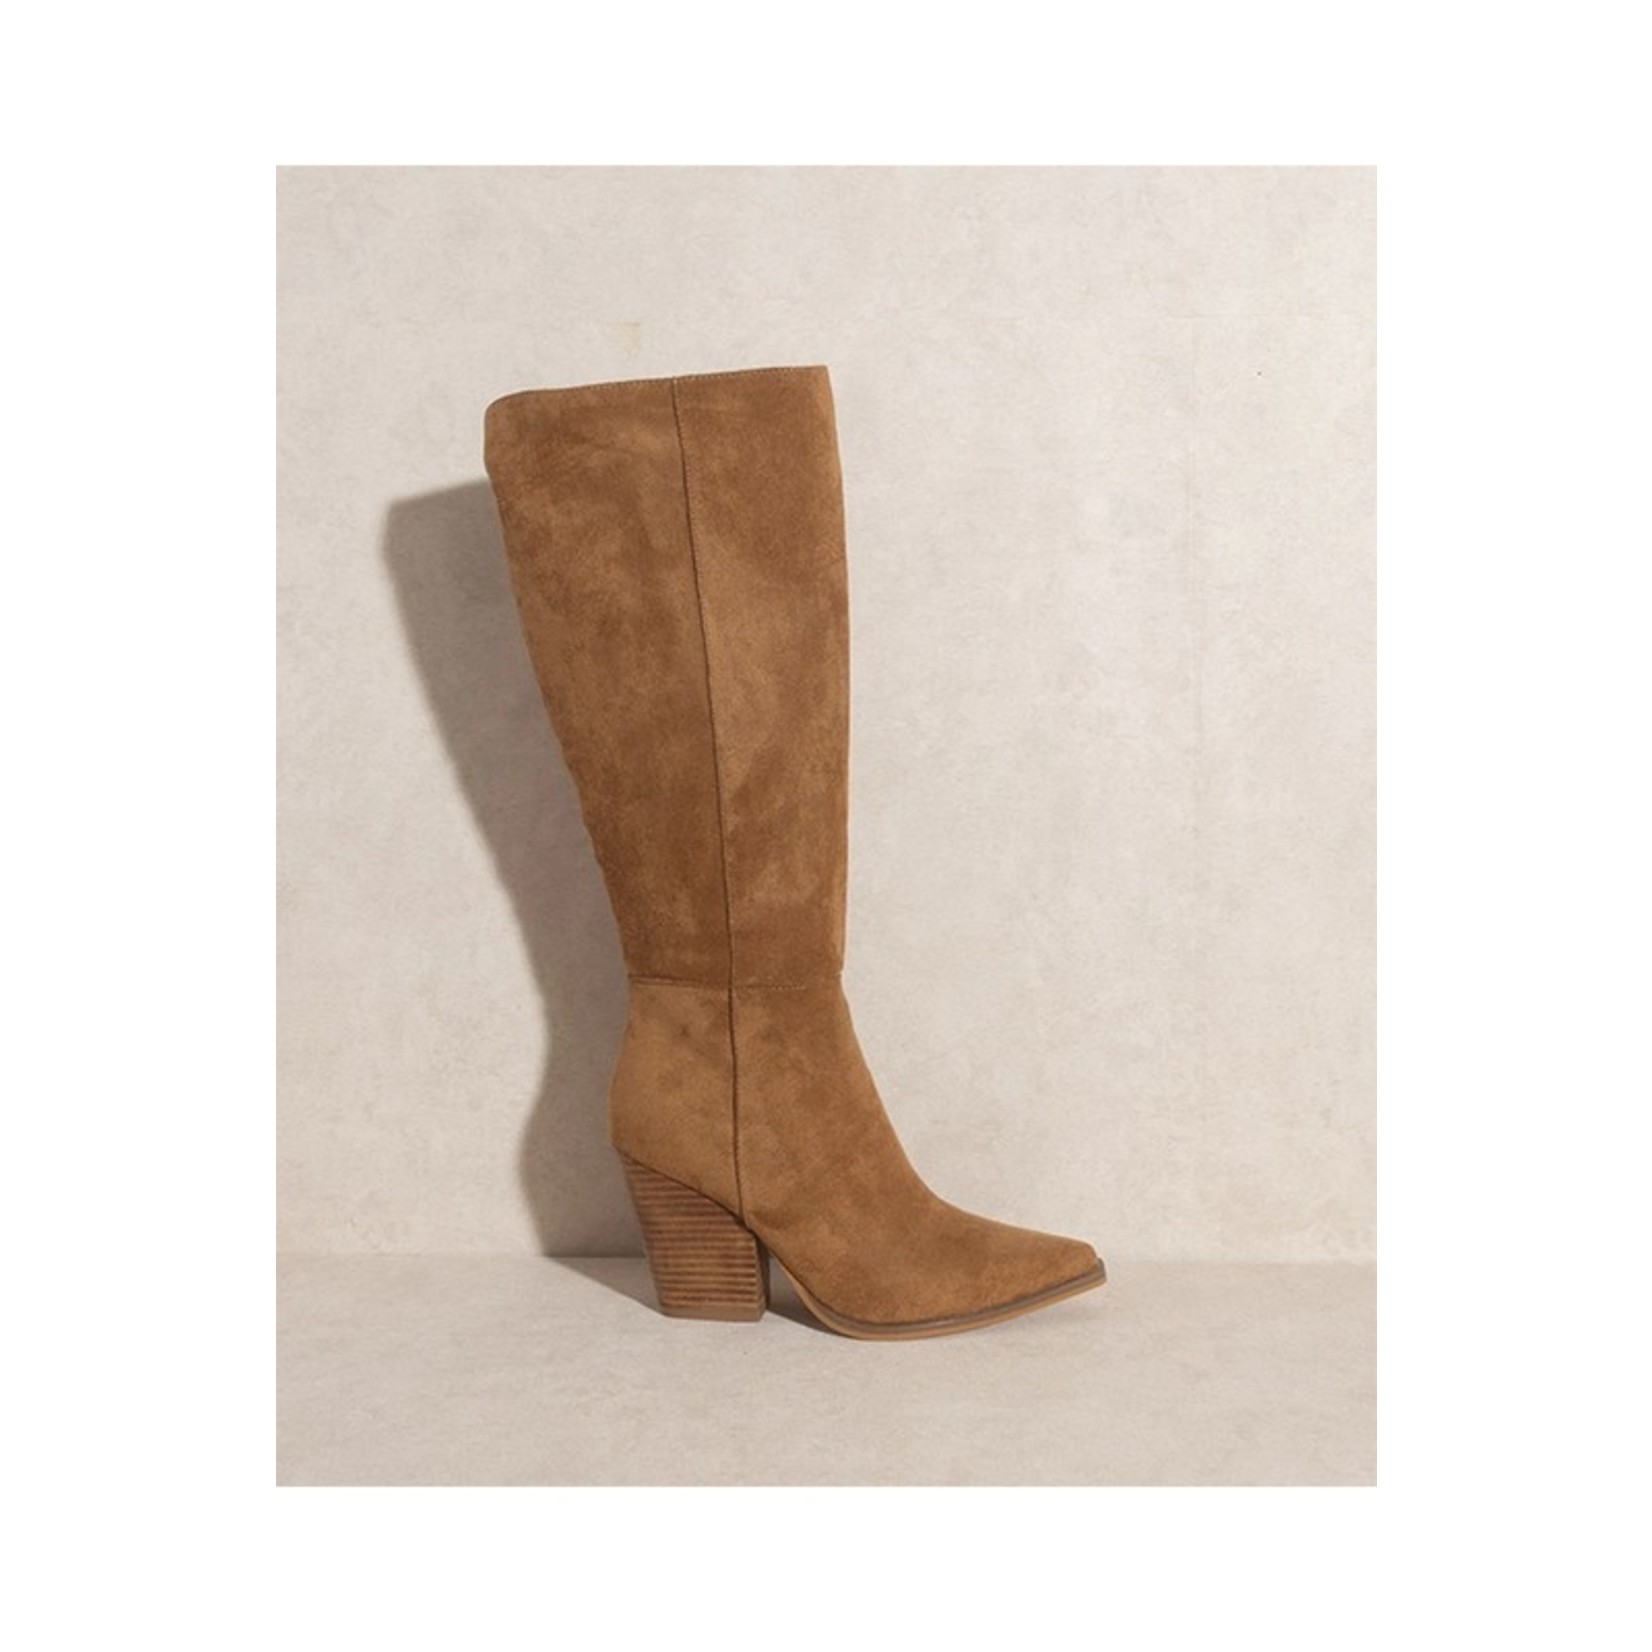 Let's See Style Lilliana Tall Suede Heeled Boot